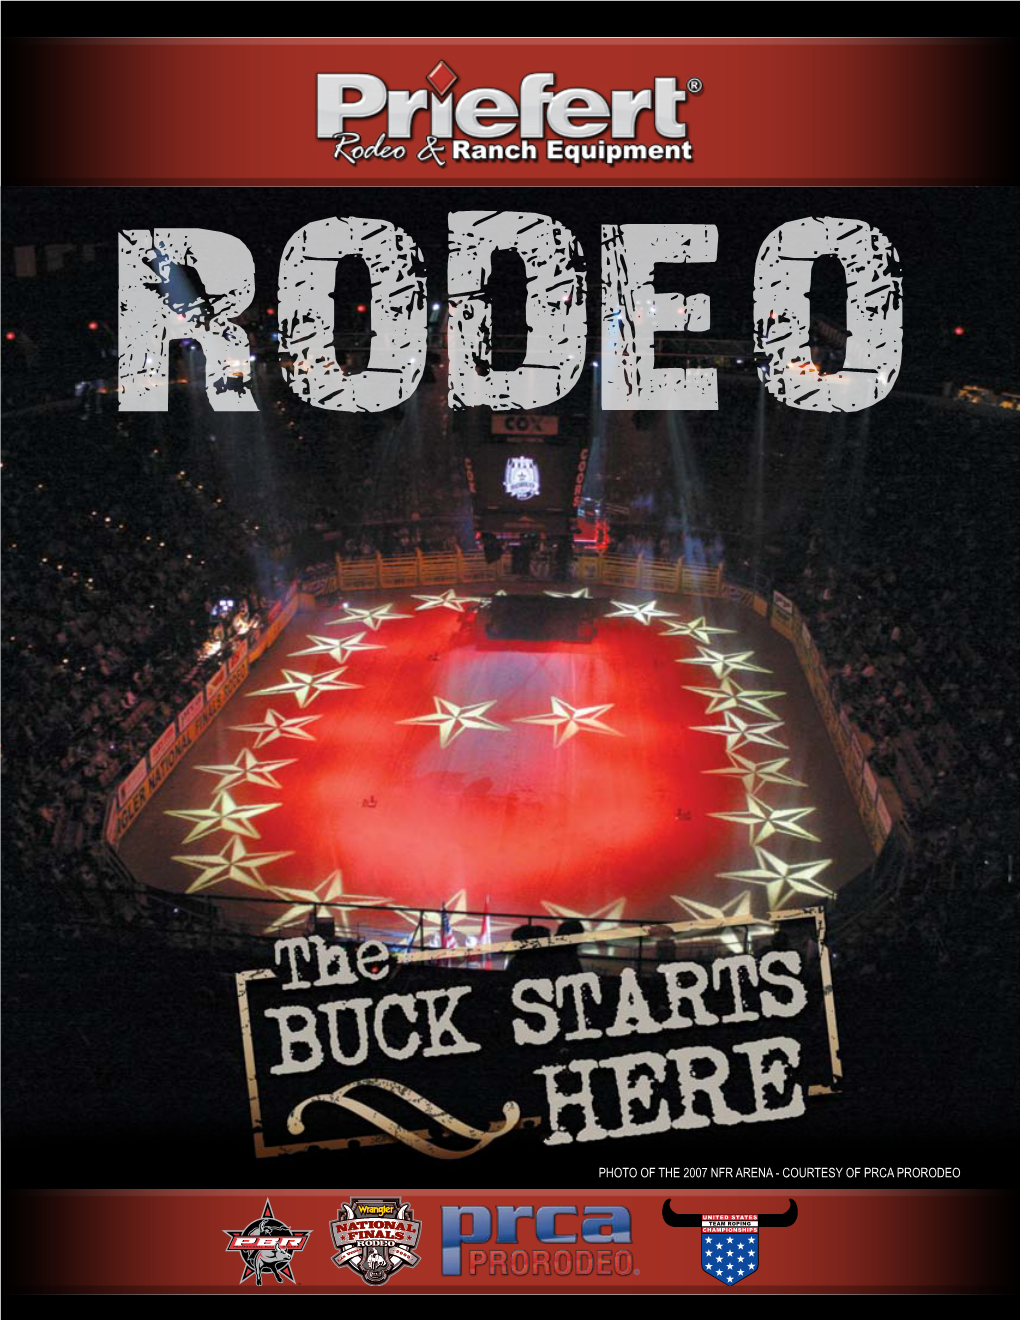 PHOTO of the 2007 NFR ARENA - COURTESY of PRCA PRORODEO the Industry Standard in Rodeo Equipment